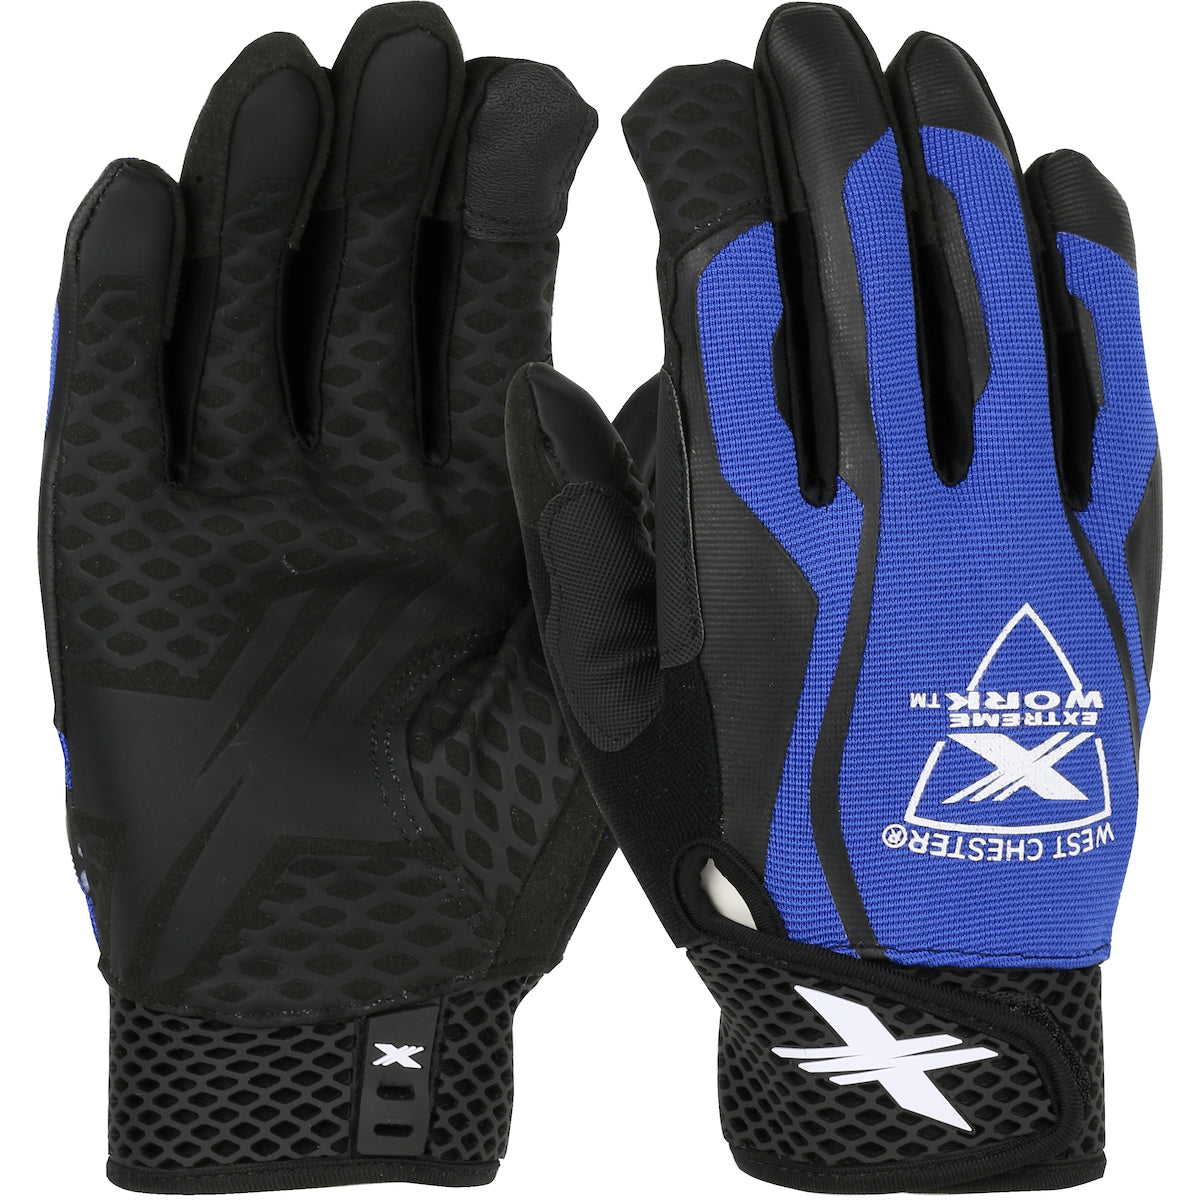 West Chester 89302/XL Synthetic Leather Palm with Silicone Grip, Blue Fabric Back & Touchscreen Index Finger - XLock Cuff